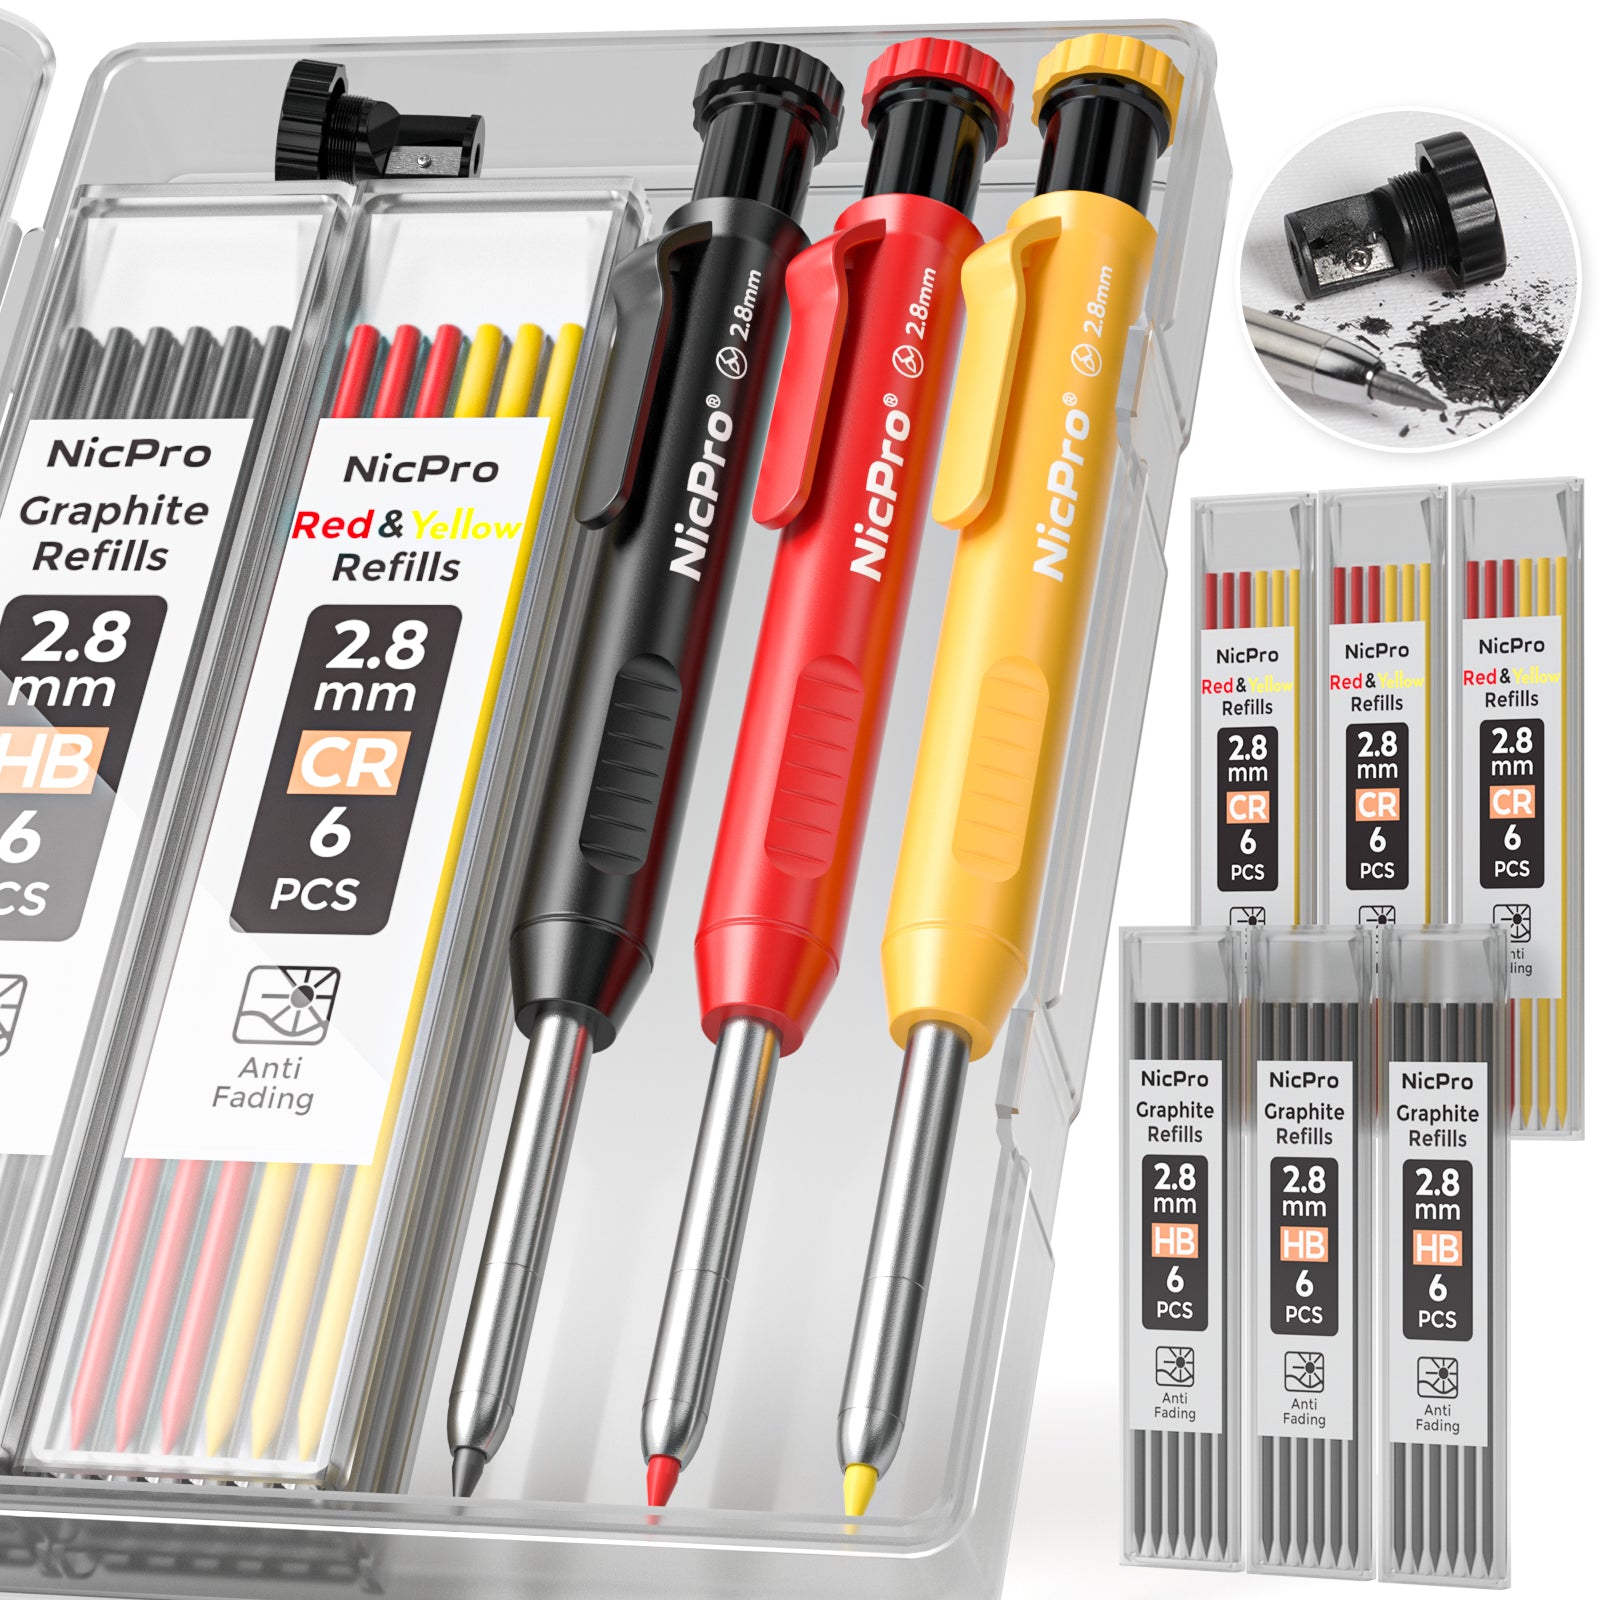 Nicpro 3 Pack Carpenter Pencil with Sharpener, Mechanical Carpenter Pencils with 36 Refills, Deep Hole Marker Construction Carpentry Pencils, Architect Pencil for Woodworking (Red, Black, Yellow)